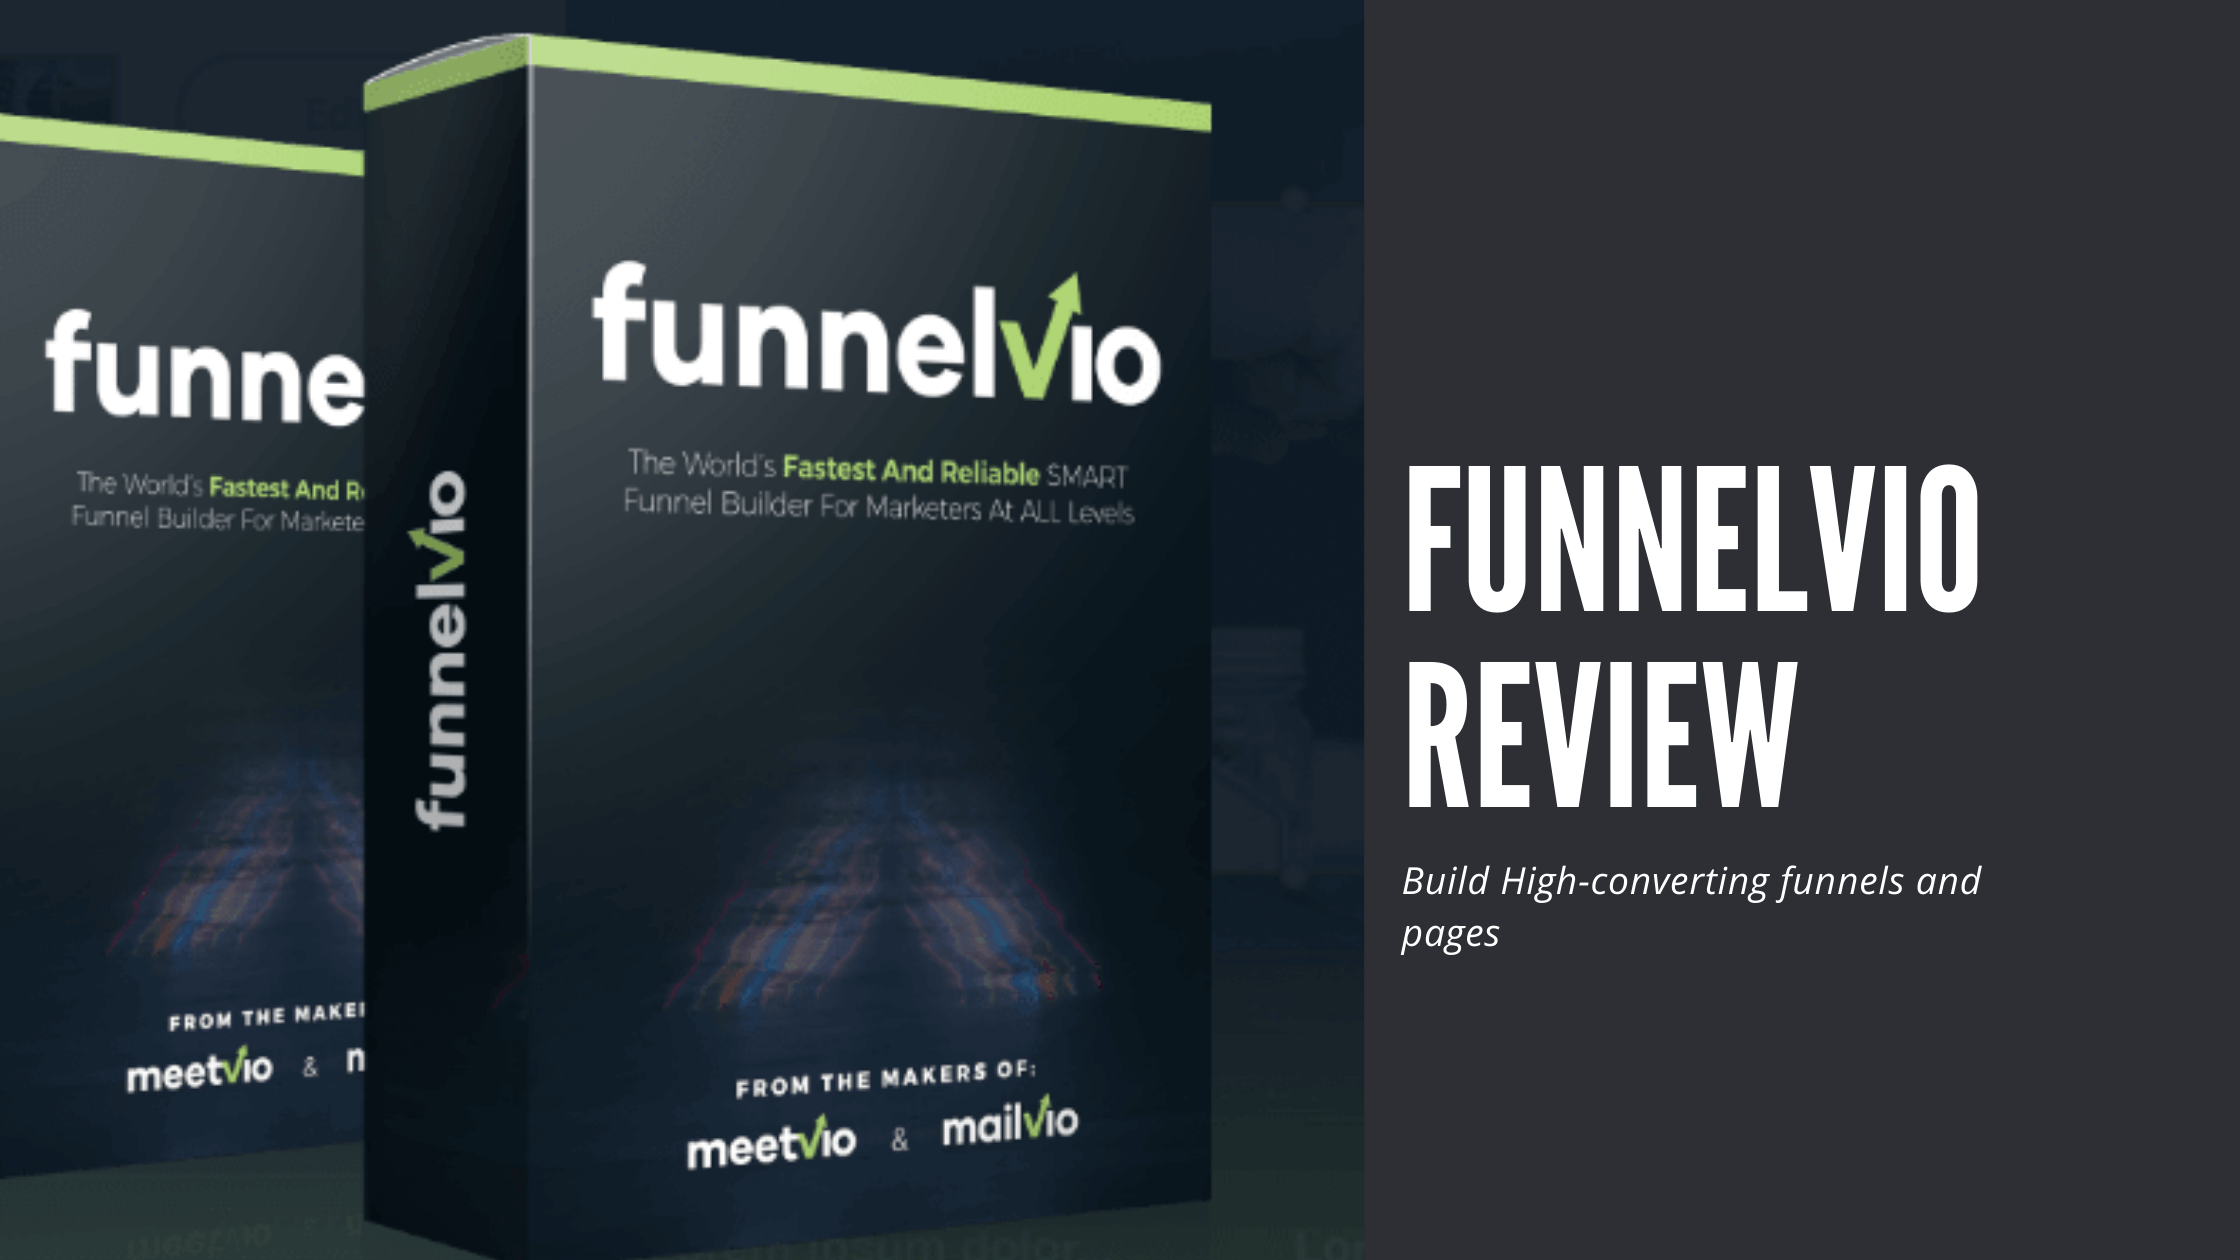 FunnelVio Review - Build and Launch High-Converting Funnels